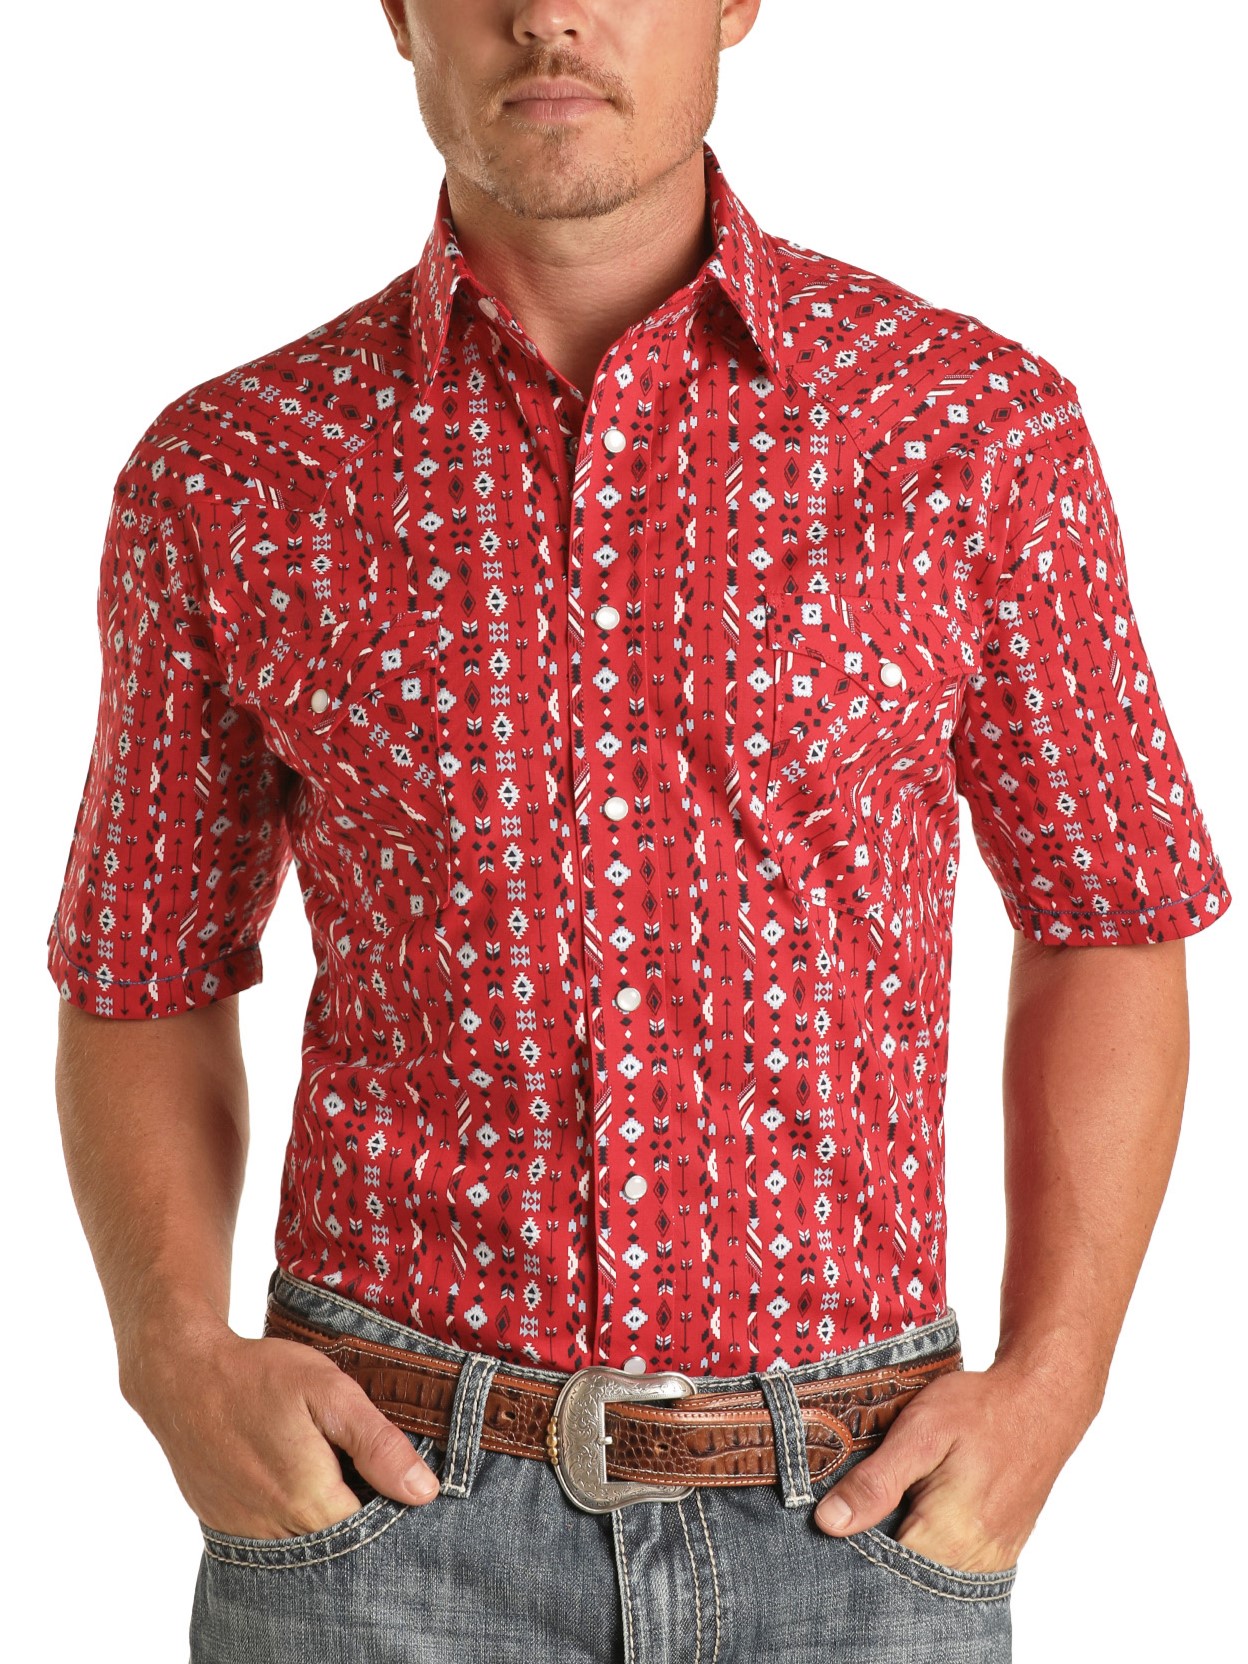 AR Pearl Snap Short Sleeve - Red/Black – Rock City Outfitters